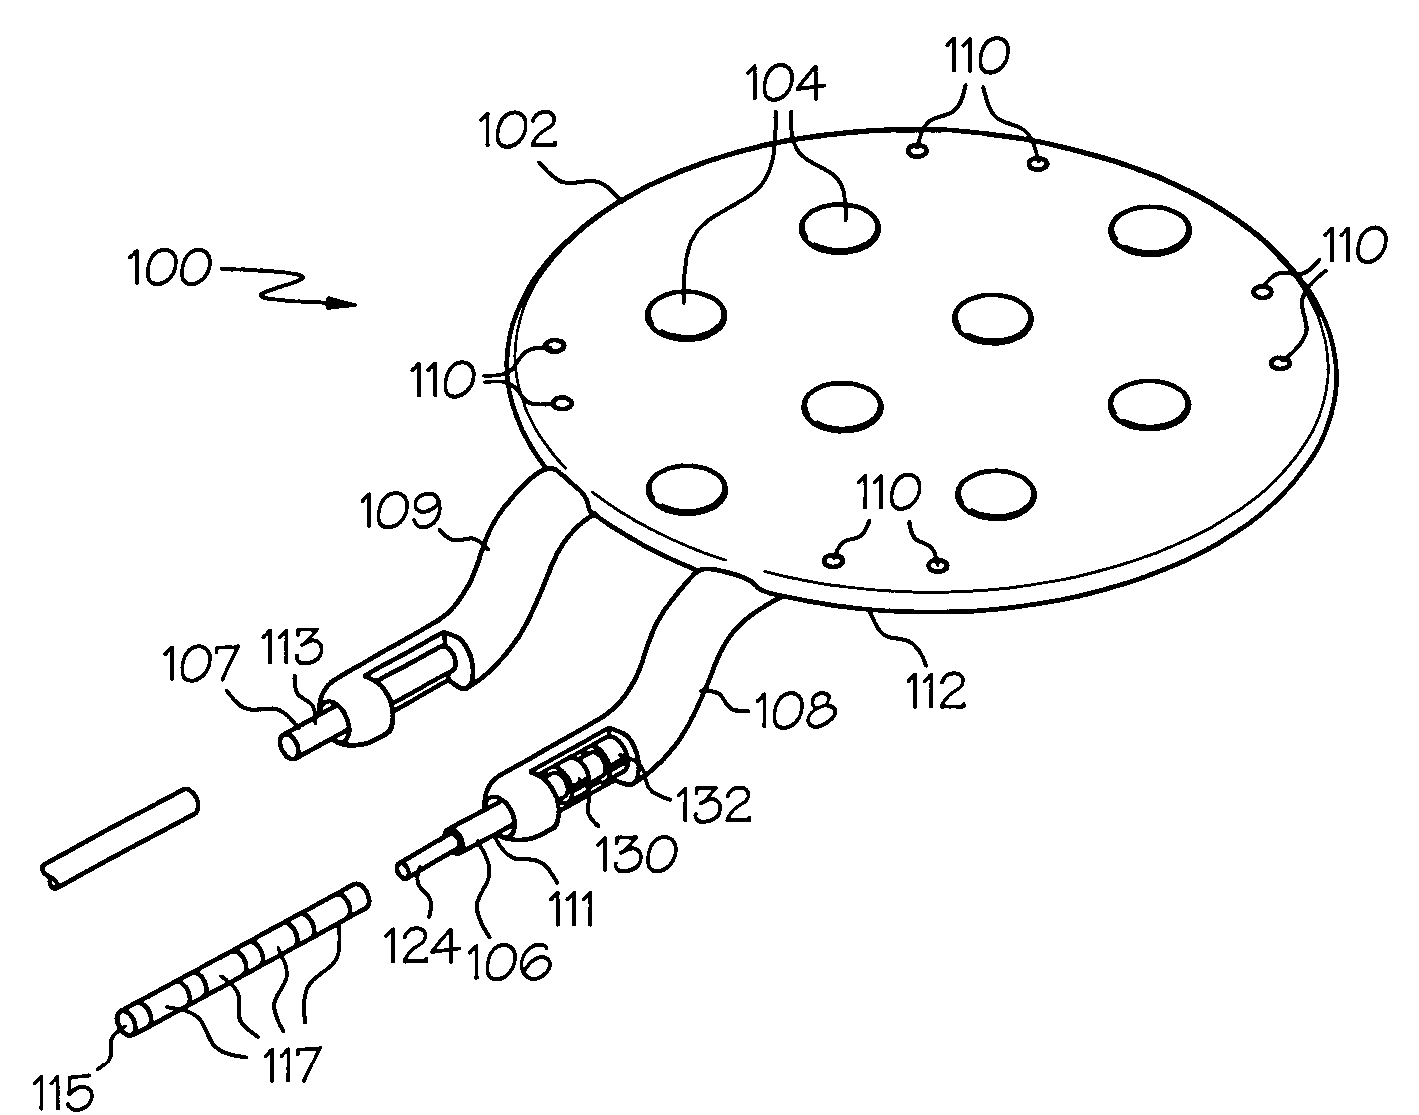 Implantable cortical neural lead and method